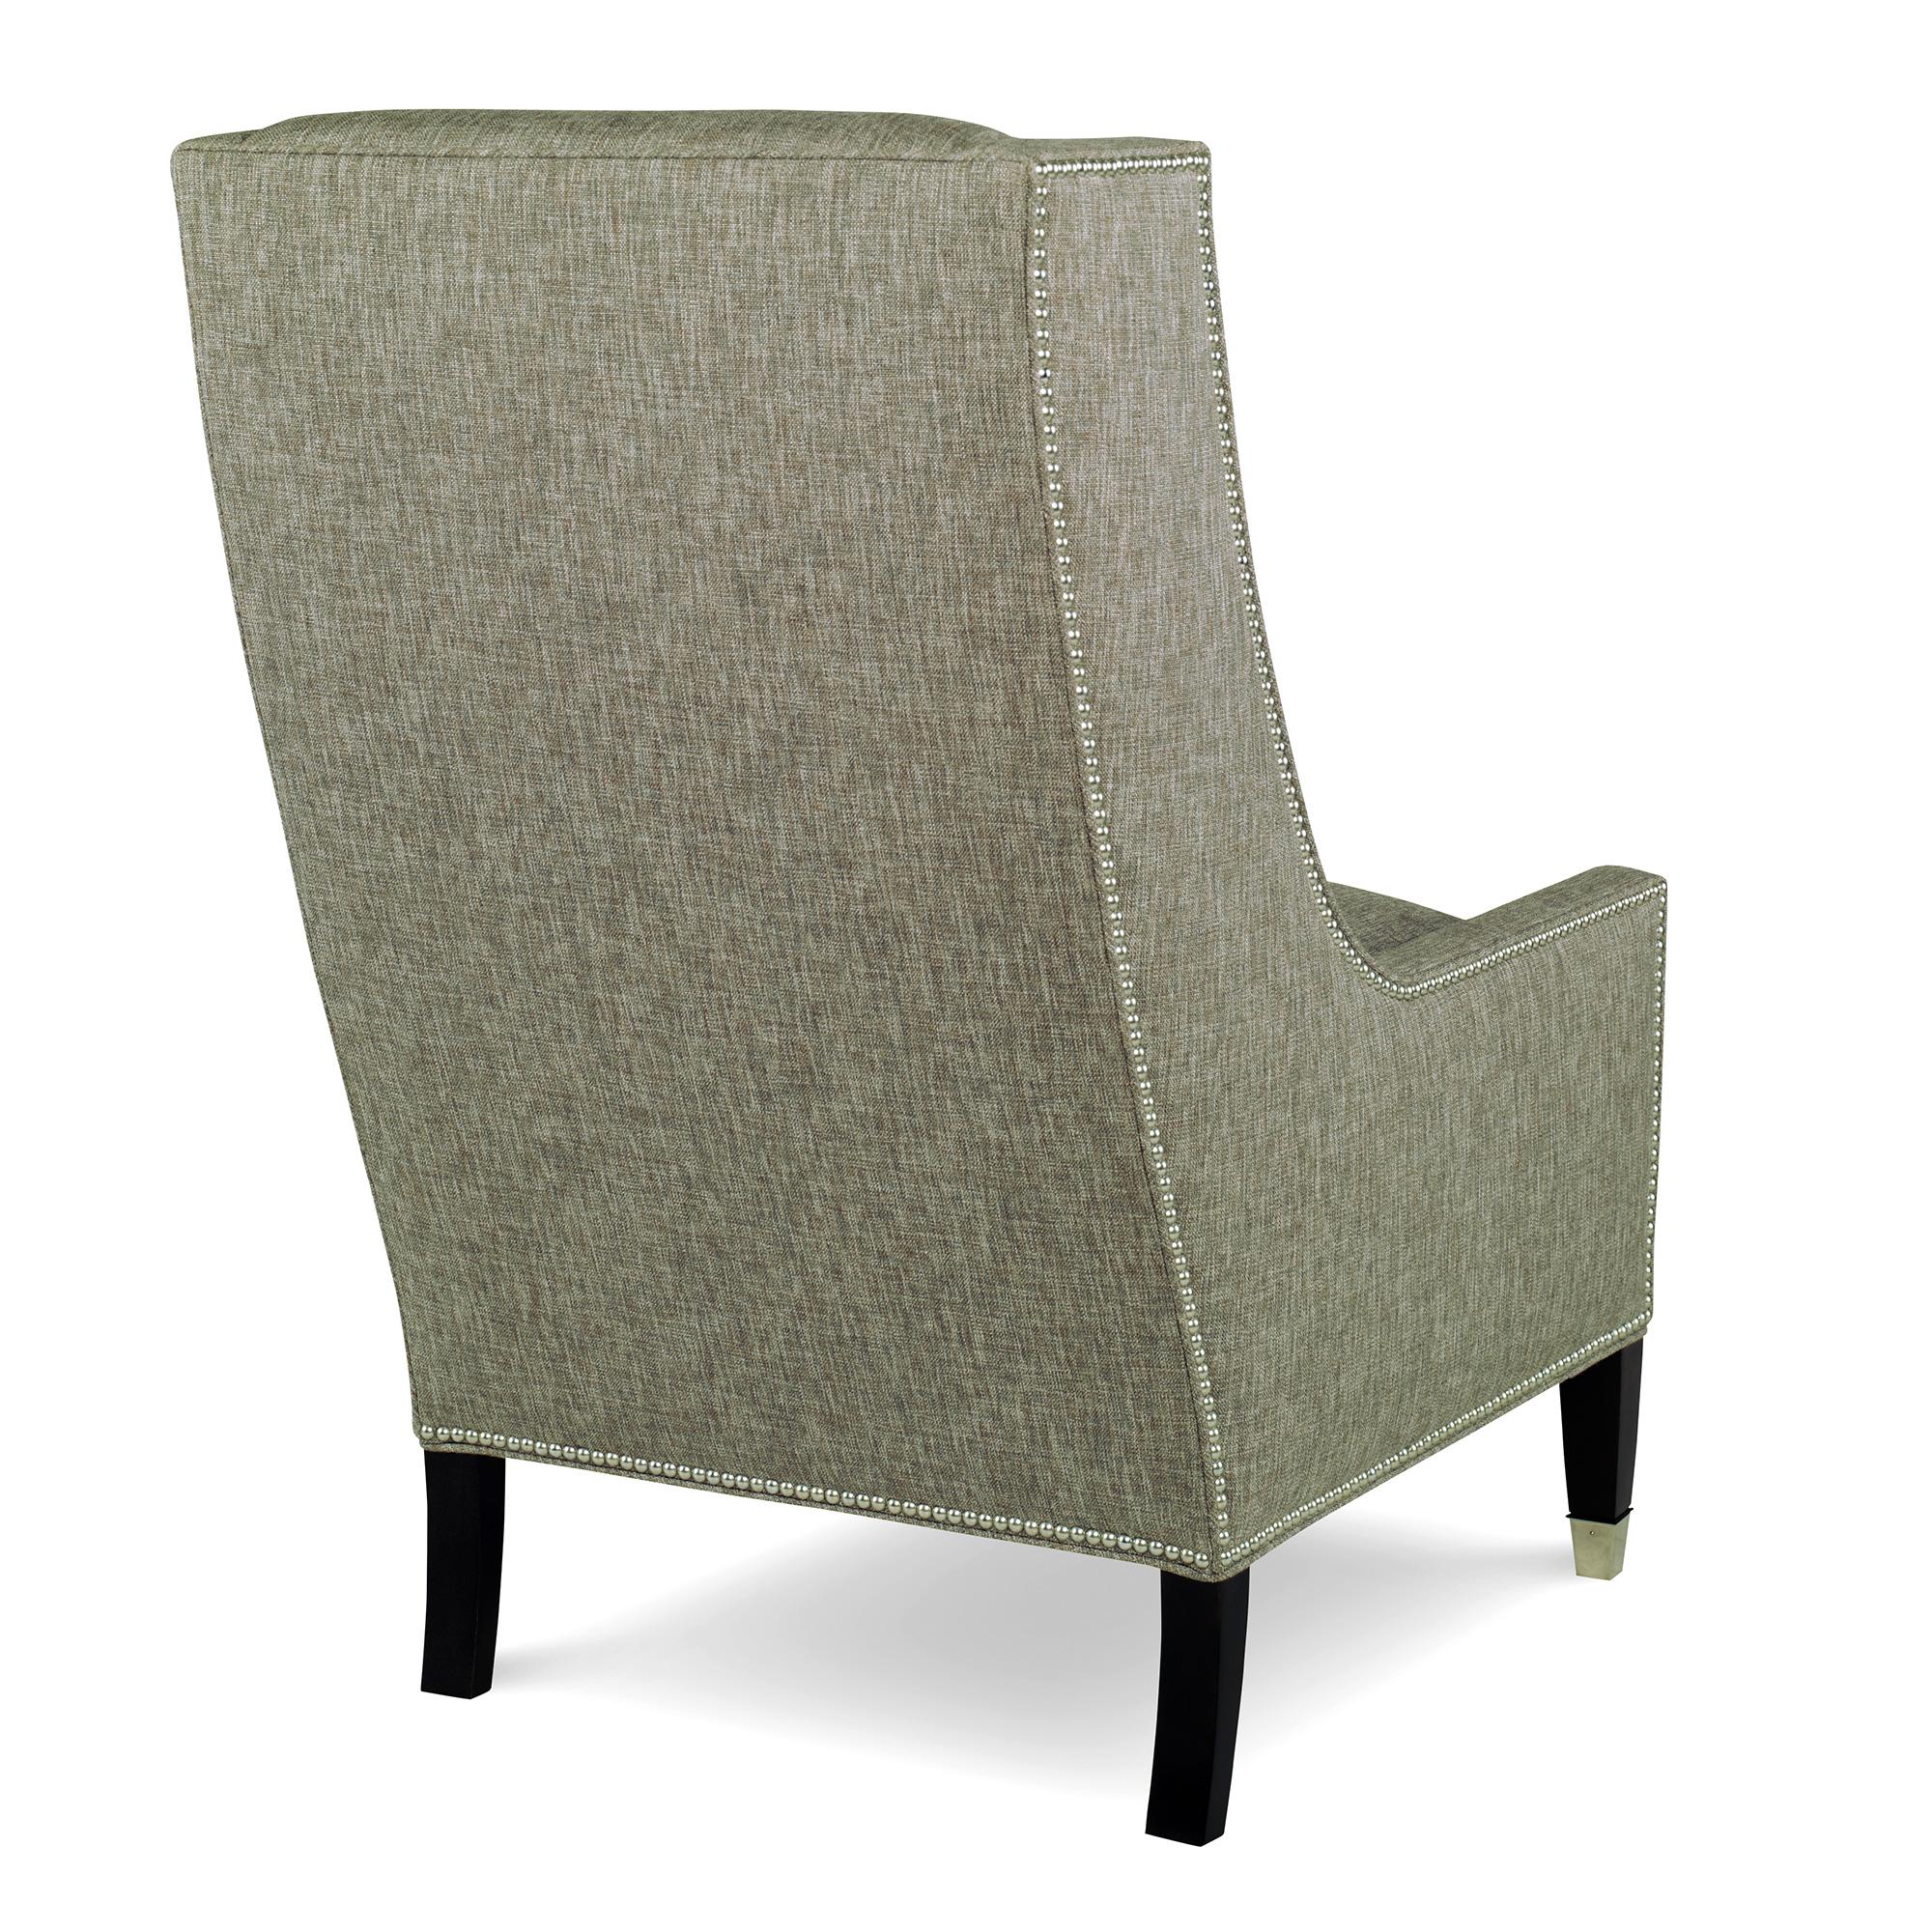 American Tall Navarre Chair in Gray by CuratedKravet